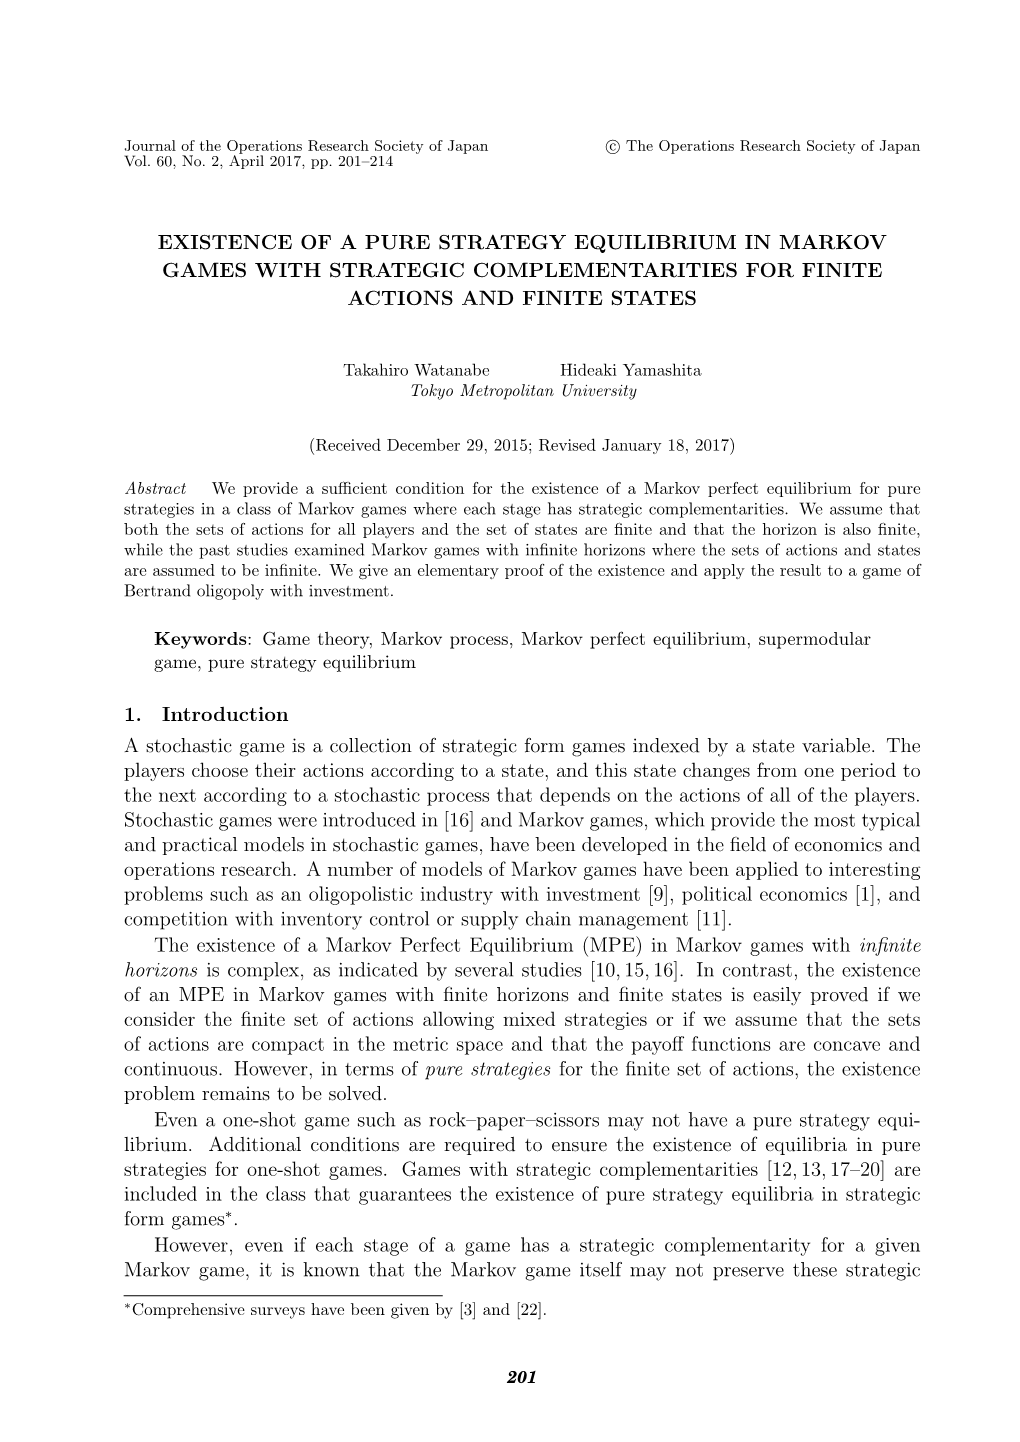 Existence of a Pure Strategy Equilibrium in Markov Games with Strategic Complementarities for Finite Actions and Finite States